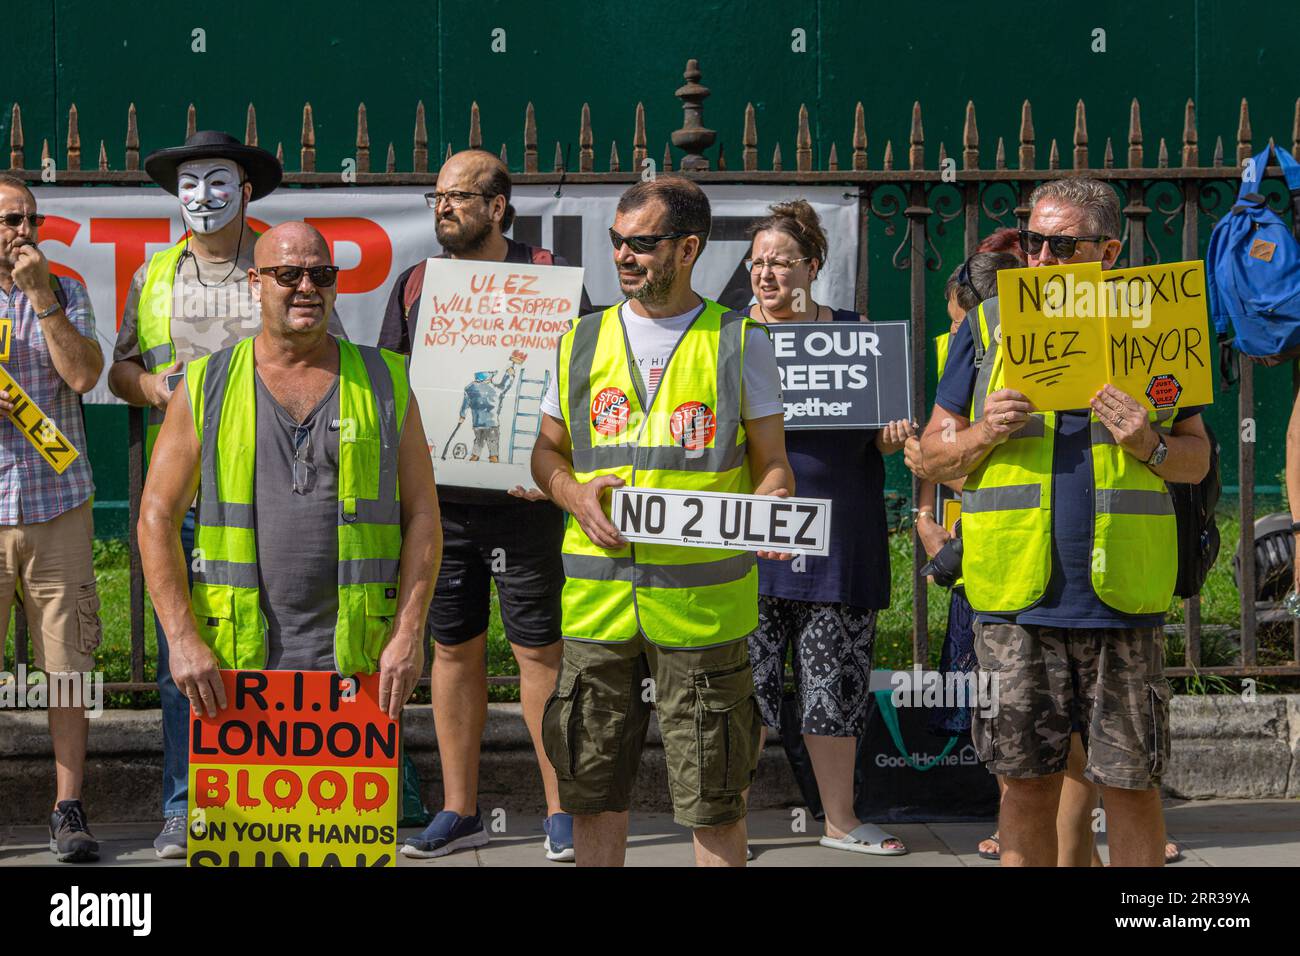 London, UK. 06th Sep, 2023. Protesters from various groups rally against the Ultra Low Emission Zone (ULEZ) outside the Houses of Parliament in Westminster today. Mayor of London, Sadiq Khan, who in his position oversees the introduction and extension of ULEZ, appears to also be a target of their protest.Photo by Horst Friedrichs /Alamy Live News Stock Photo